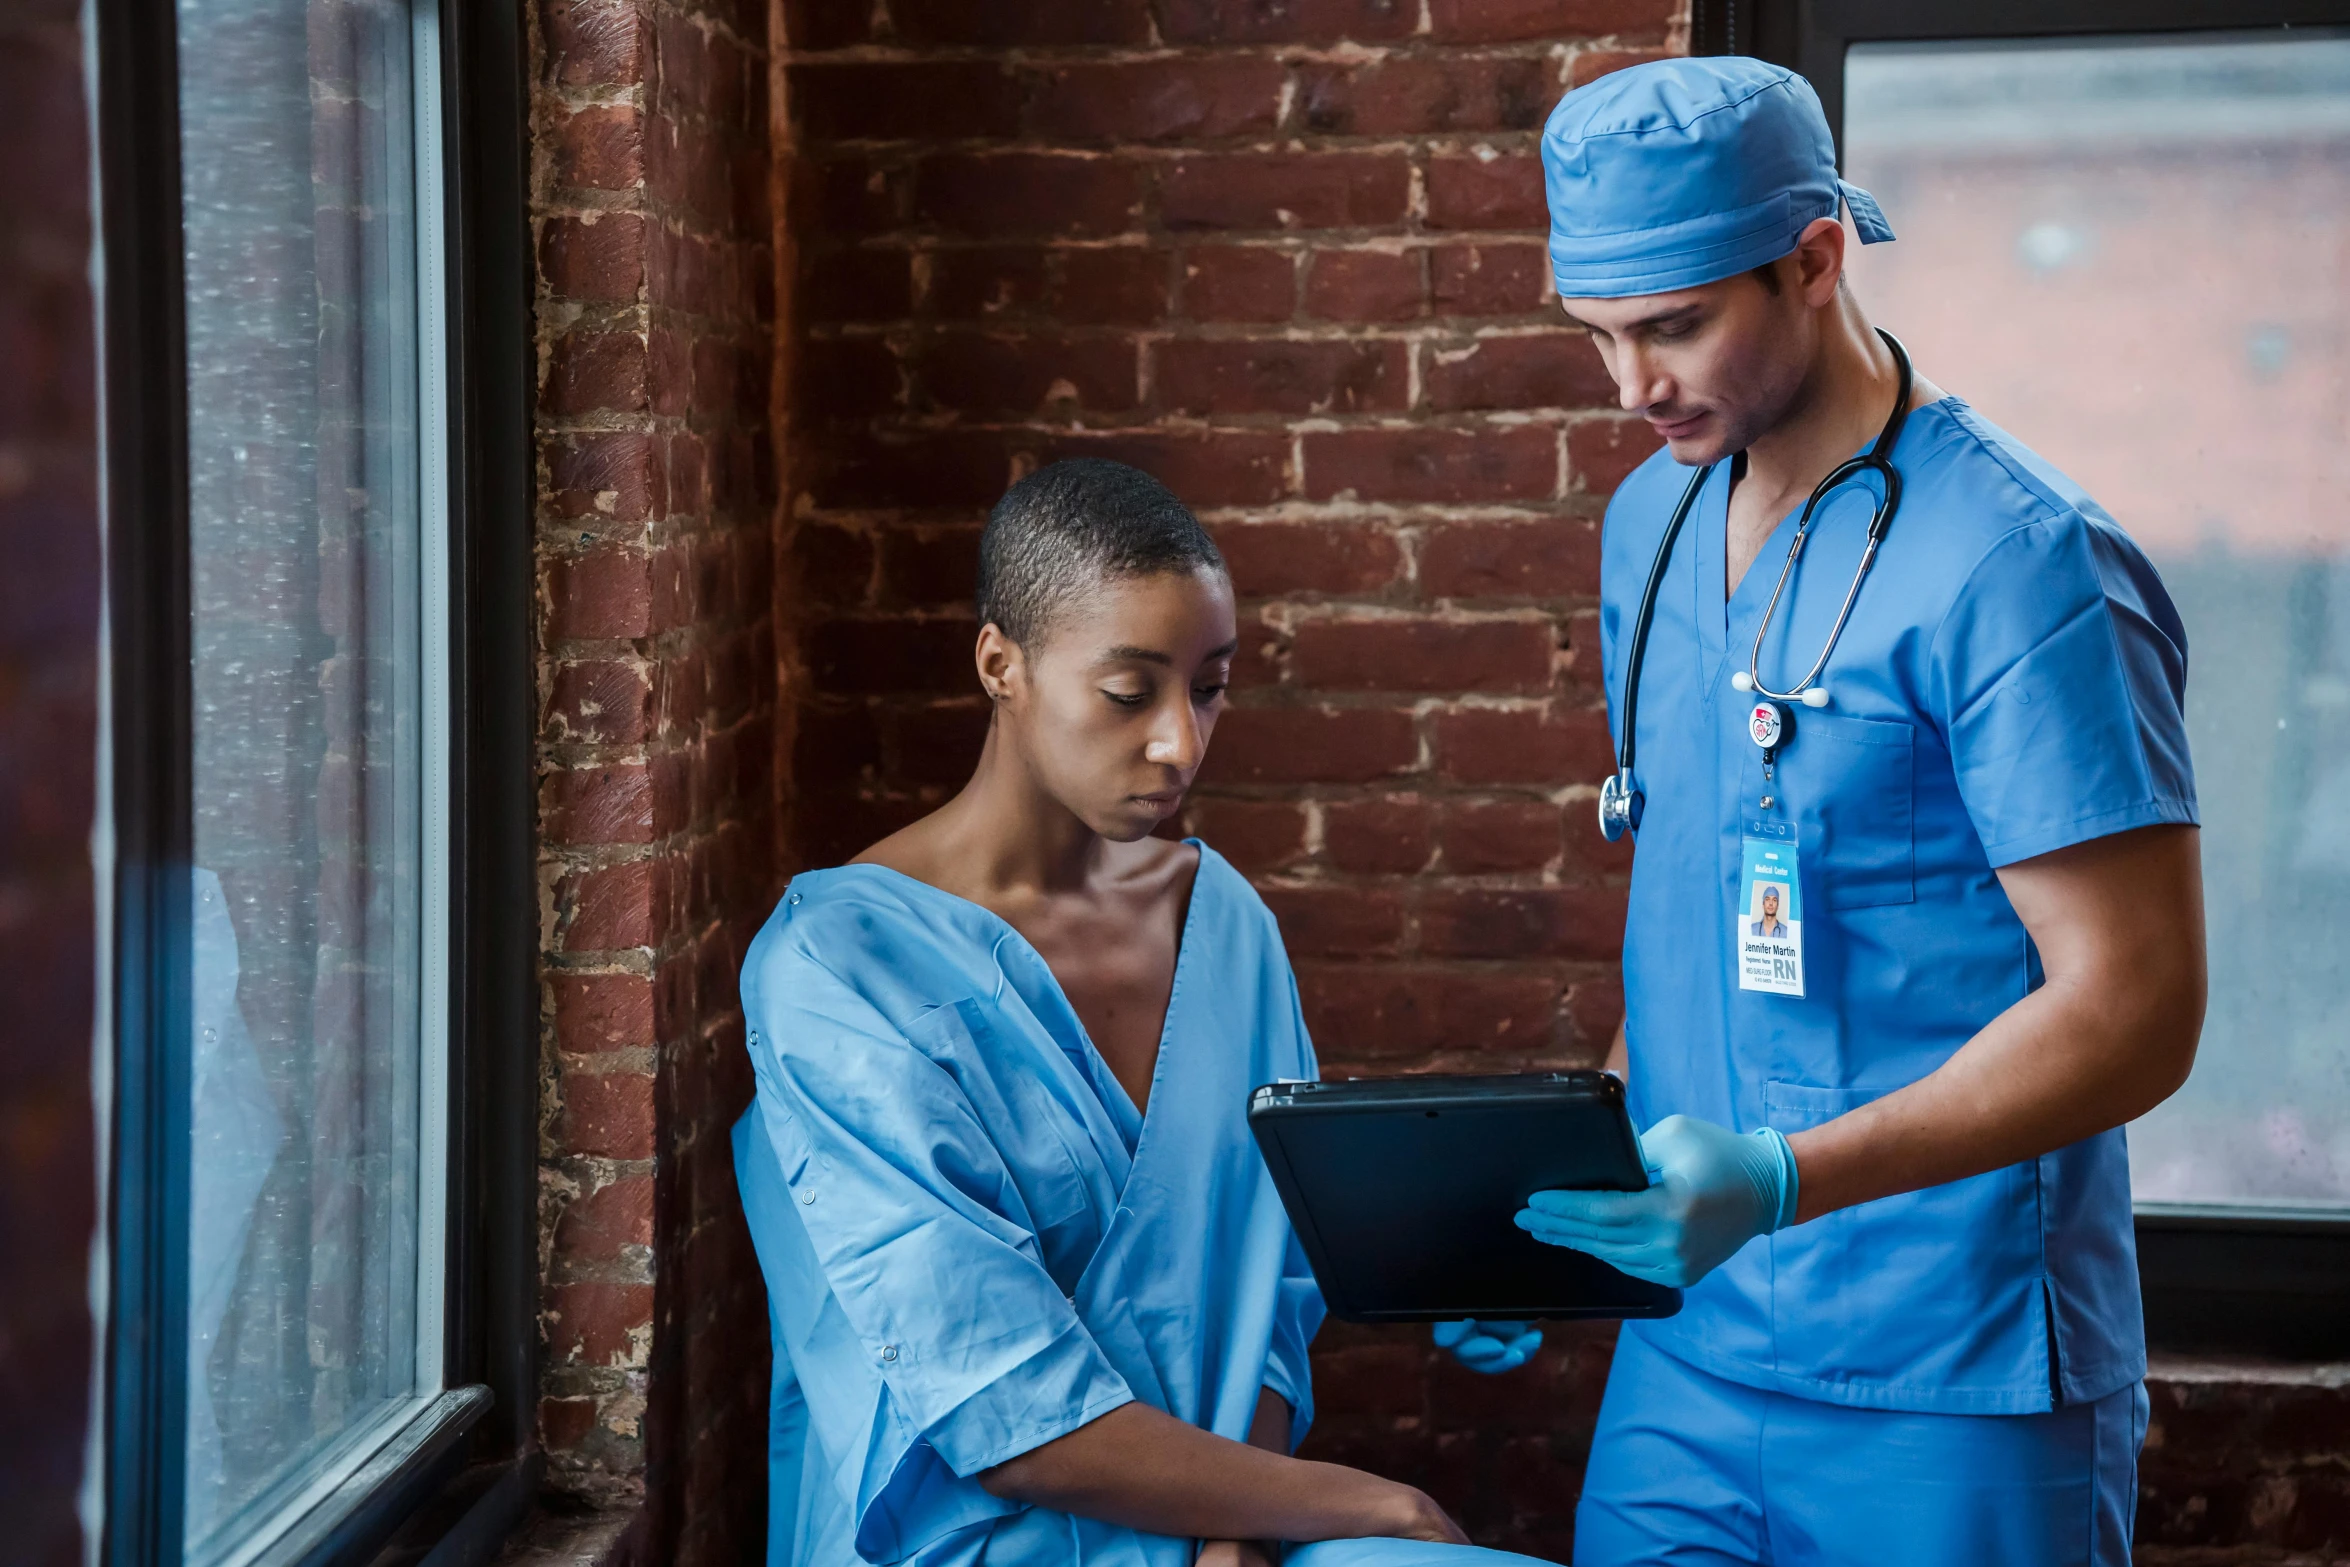 a couple of men standing next to each other, by Meredith Dillman, pexels, renaissance, nurse scrubs, sad prisoner holding ipad, ashteroth, surgical gown and scrubs on